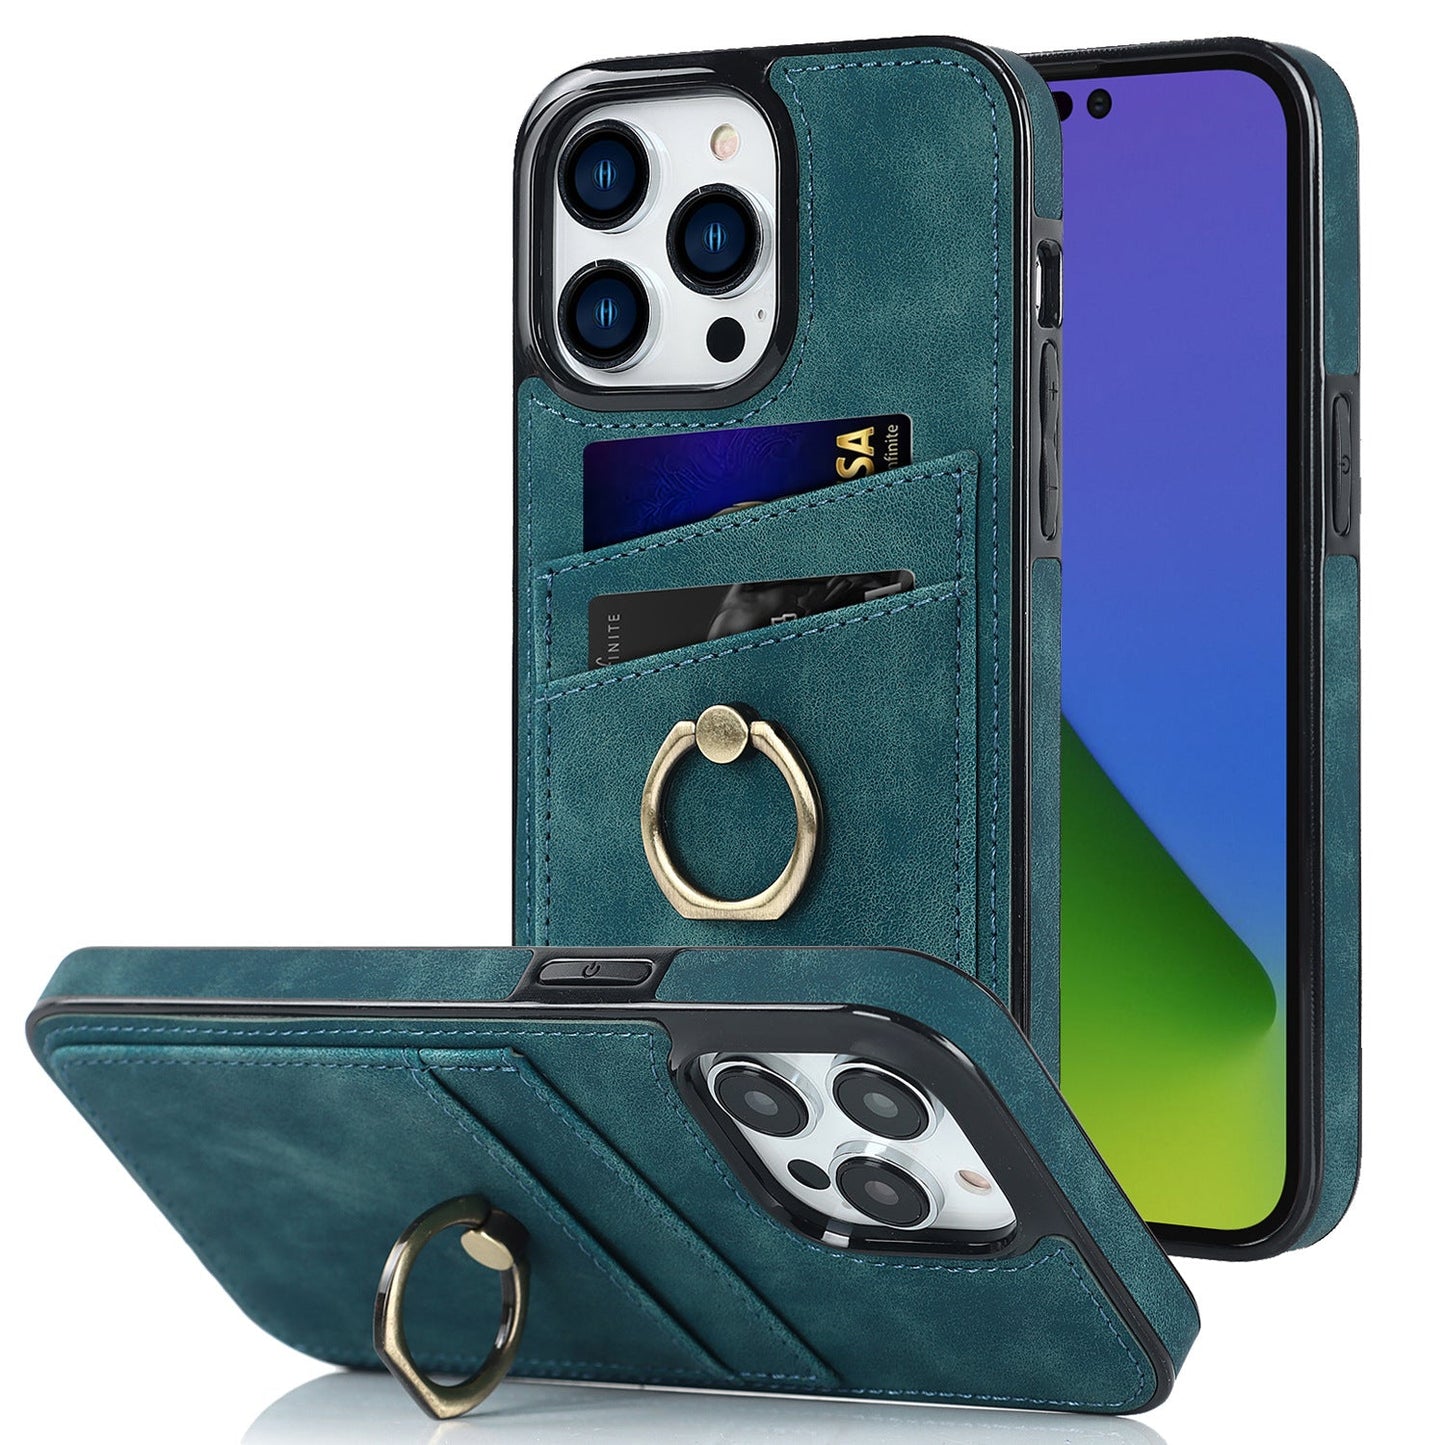 Retro leather card case ring phone case